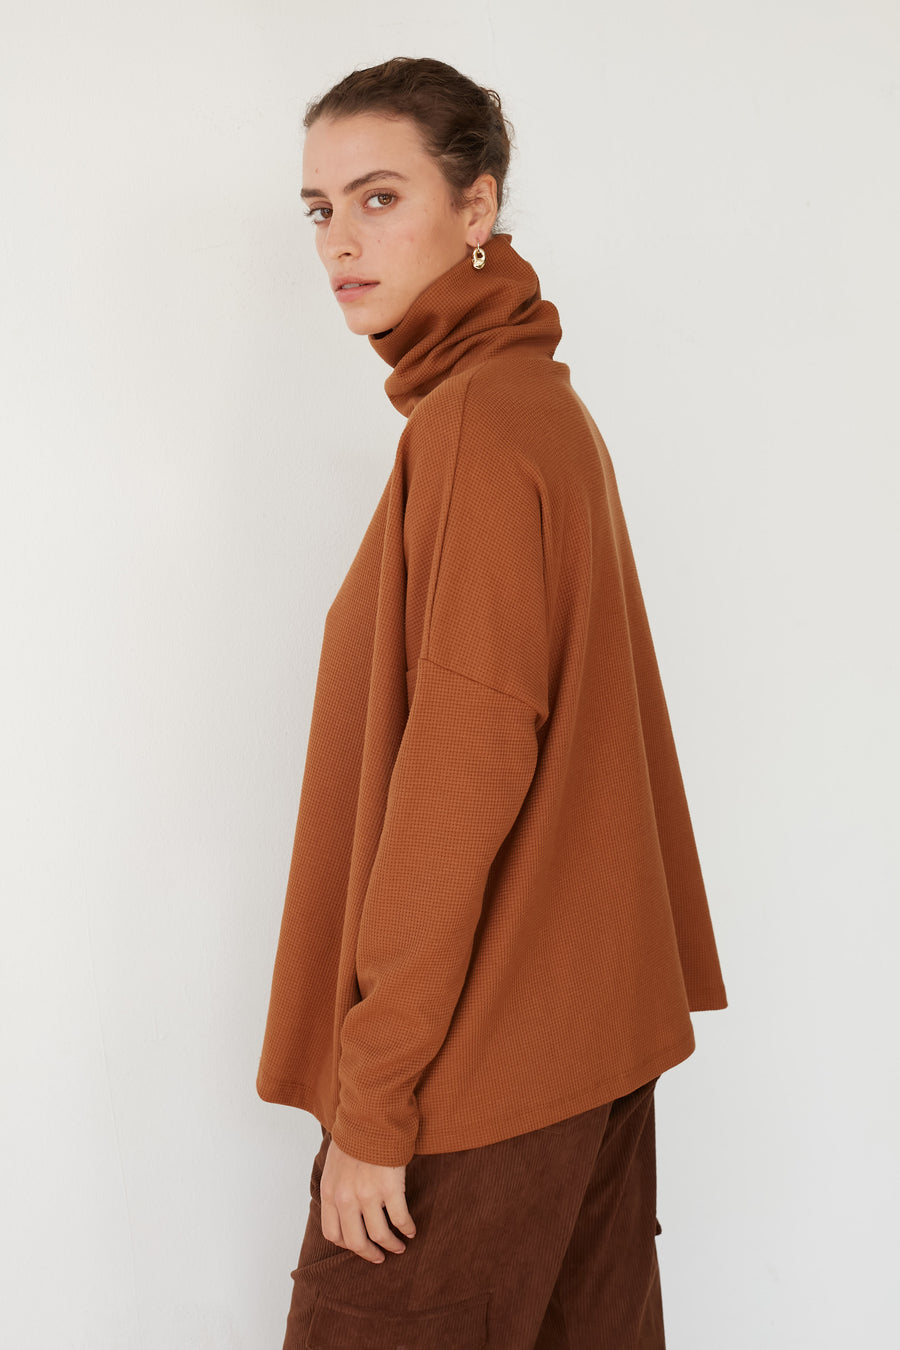 ALL MY HEART SQ TOP CAMEL